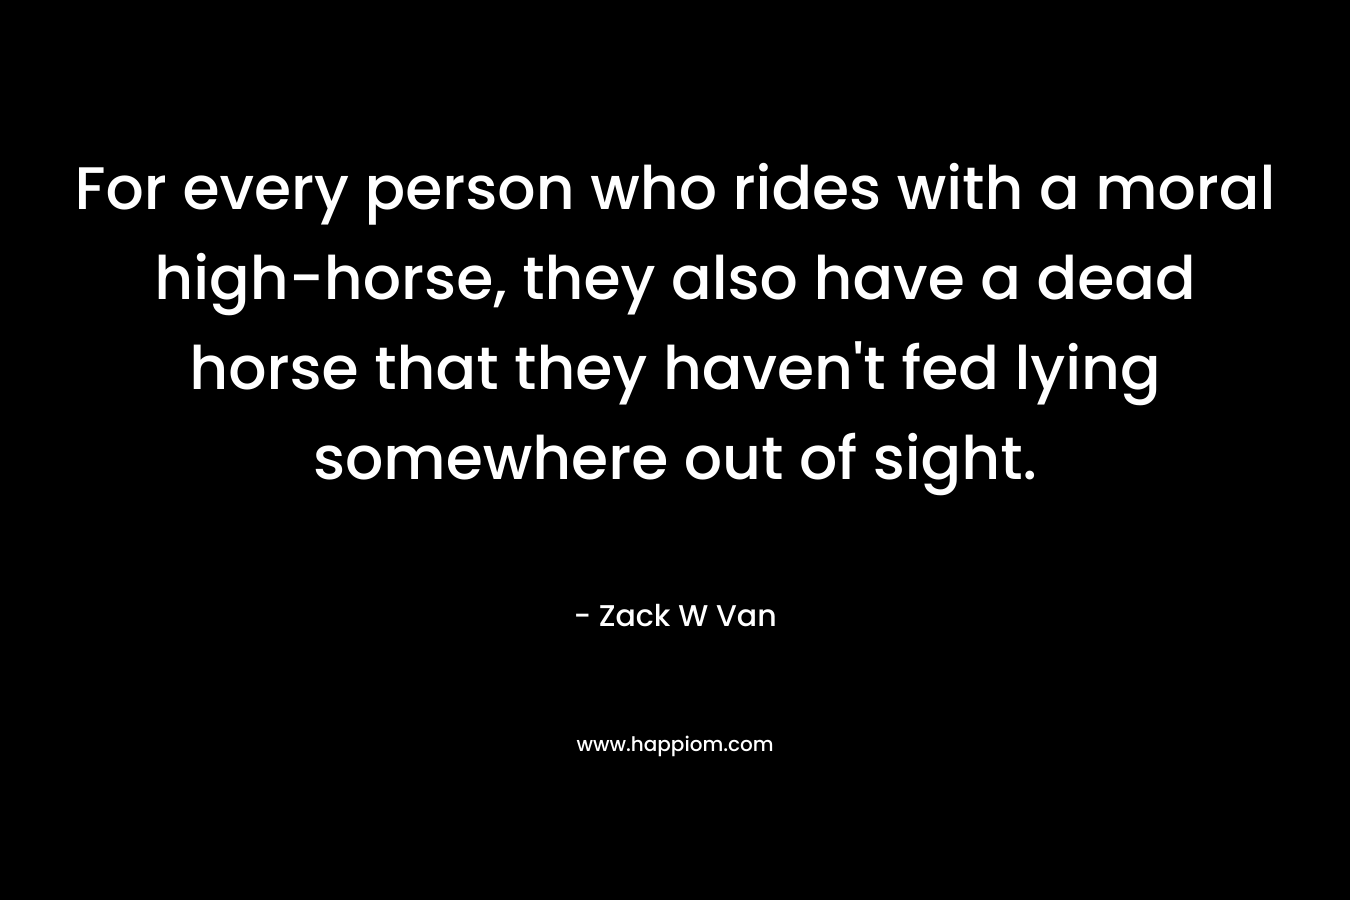 For every person who rides with a moral high-horse, they also have a dead horse that they haven’t fed lying somewhere out of sight. – Zack W Van